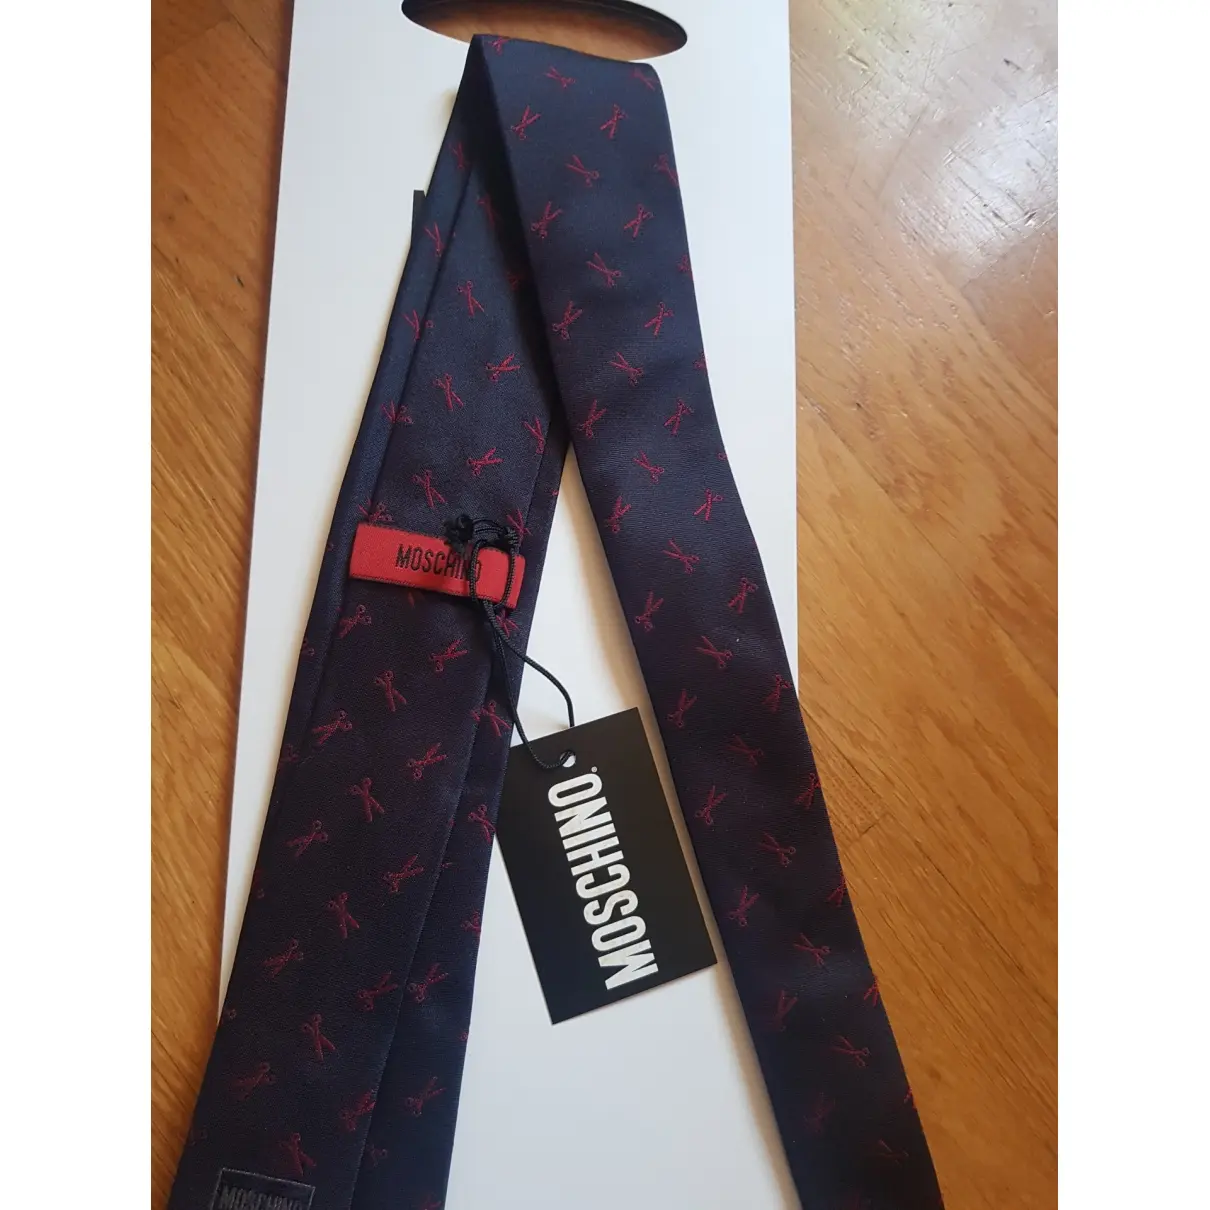 Moschino Tie for sale